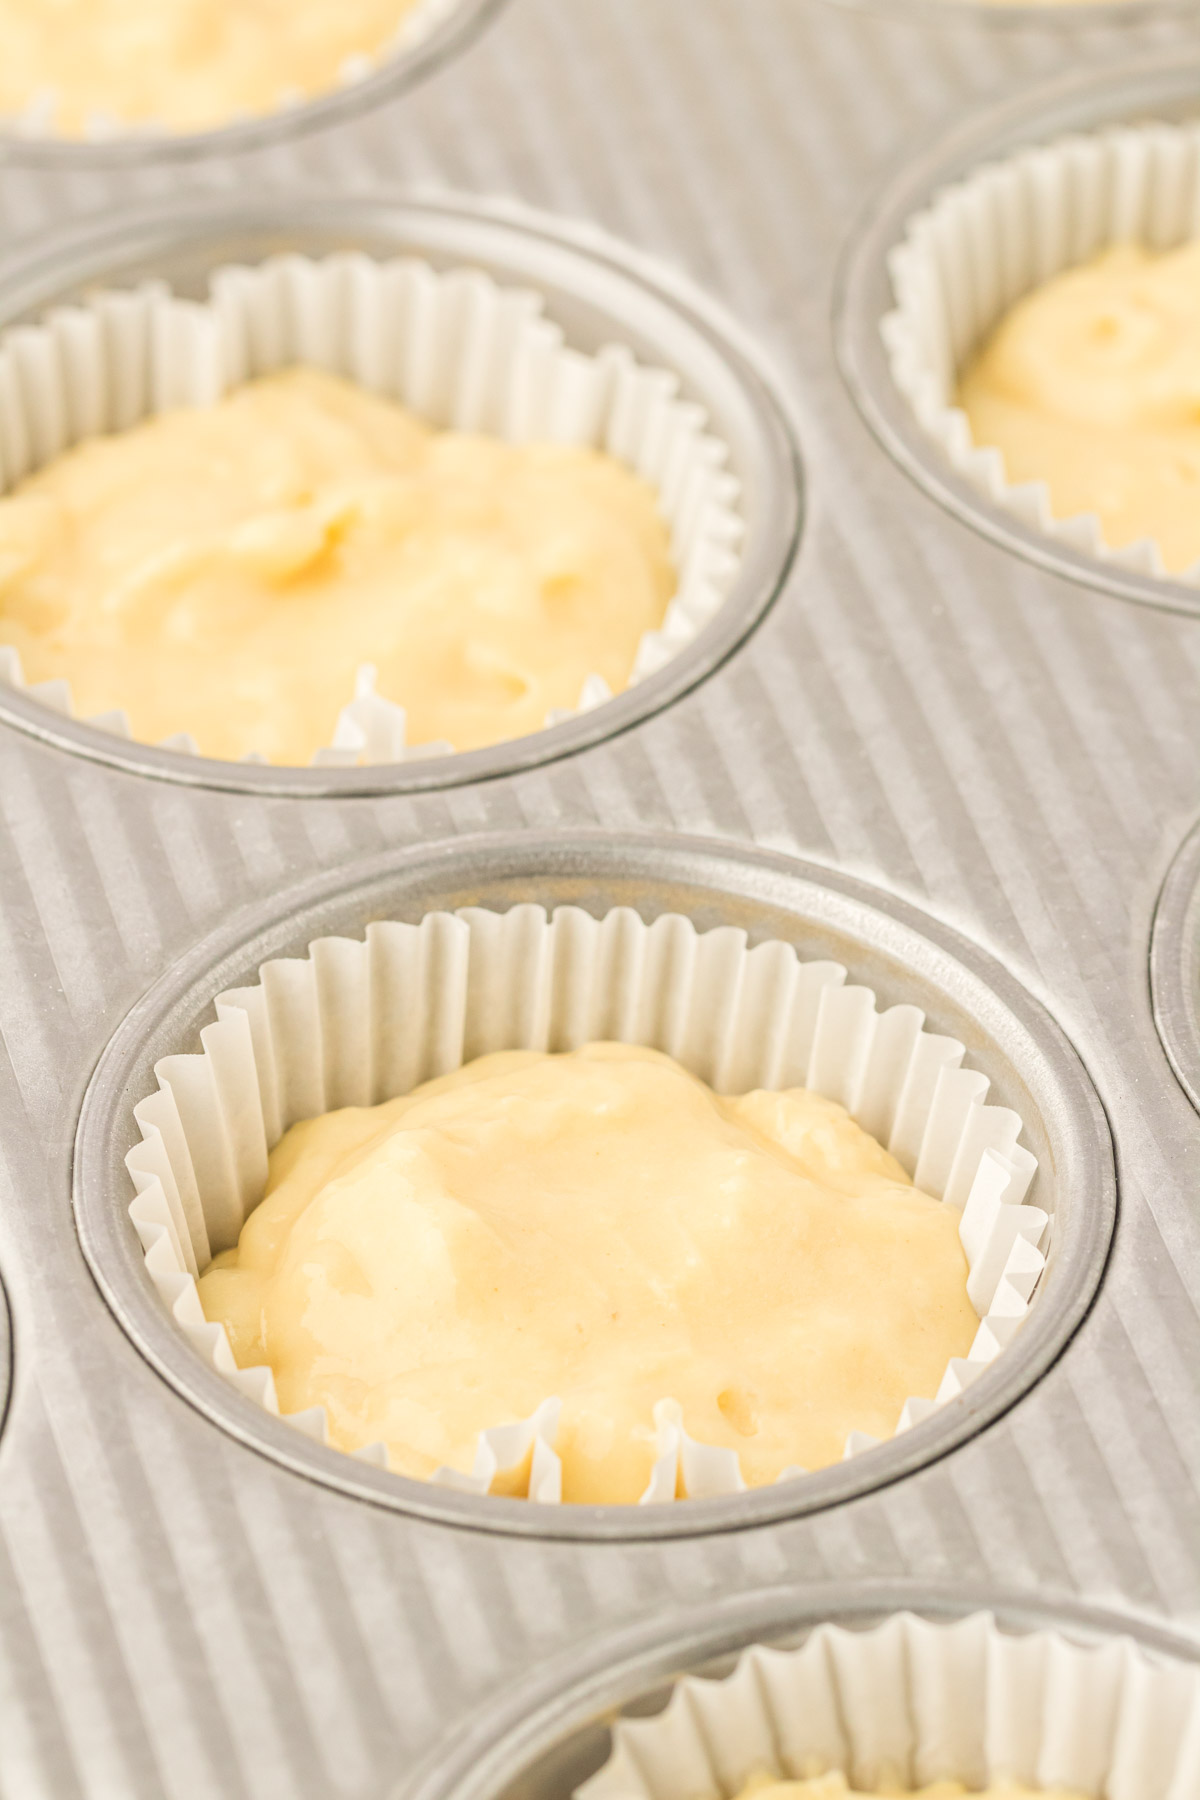 Yellow cupcake batter in a cupcake pan ready to be baked.